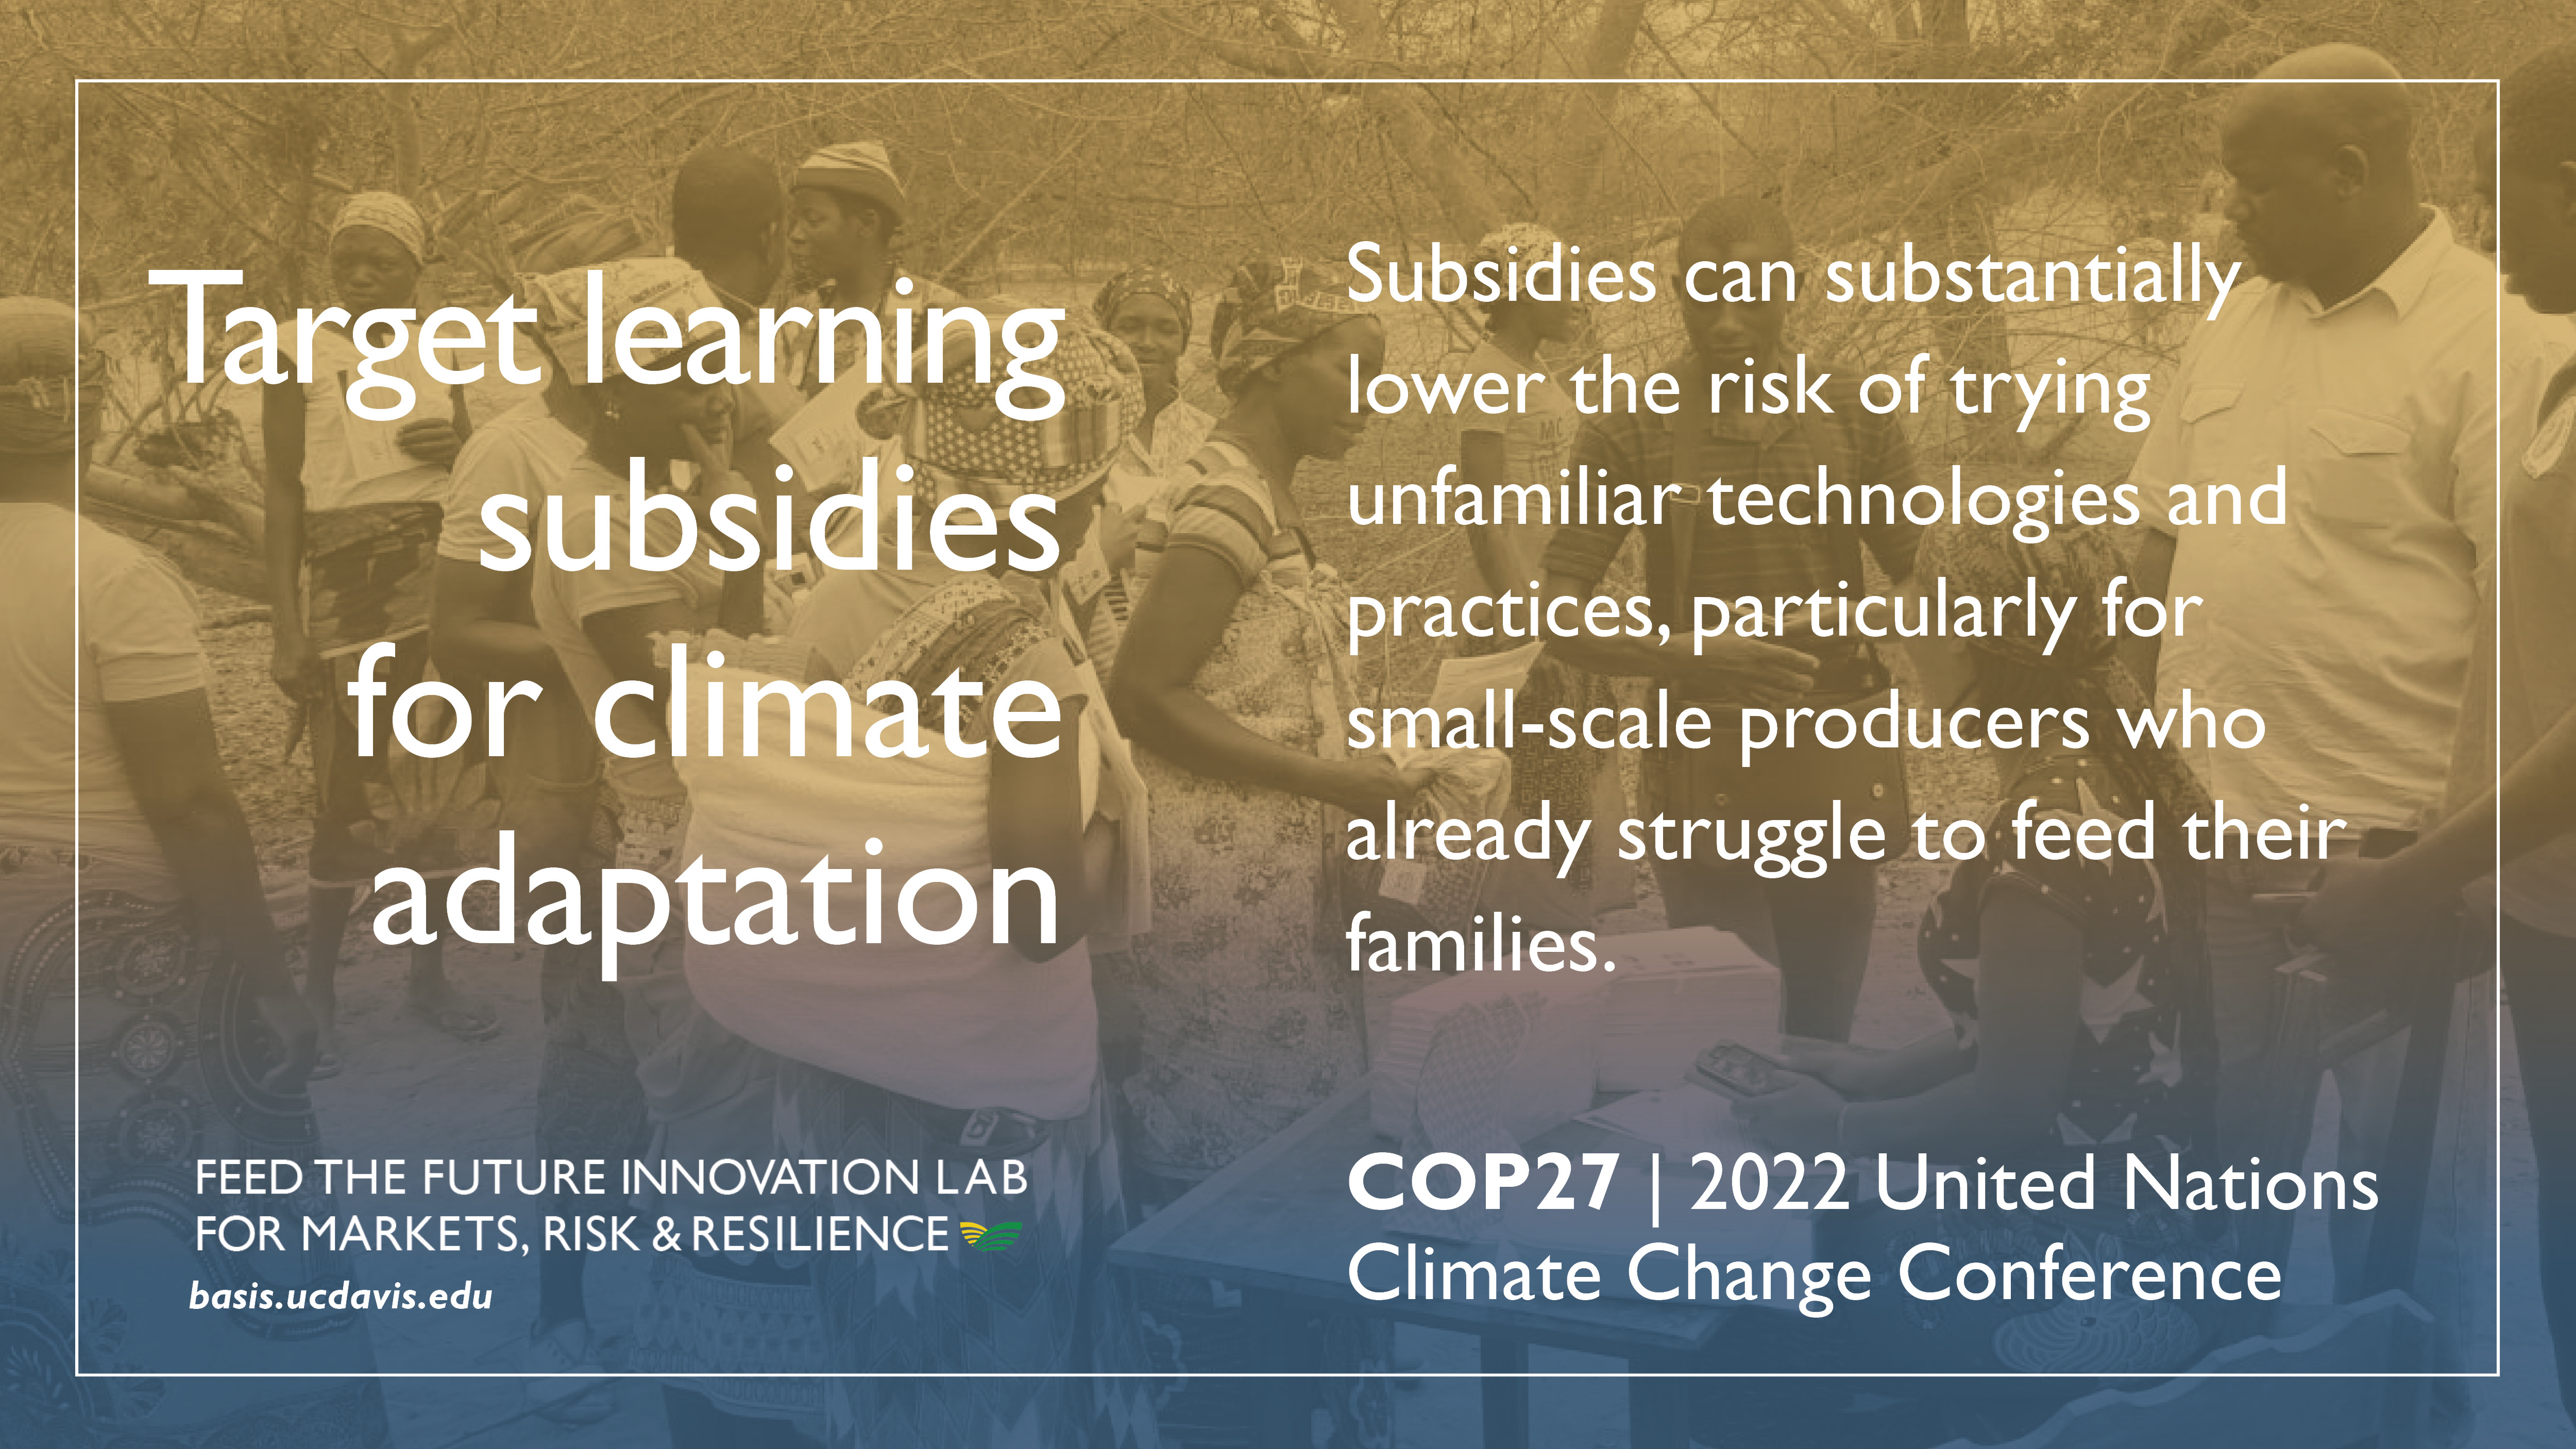 Target learning subsidies for climate adaptation